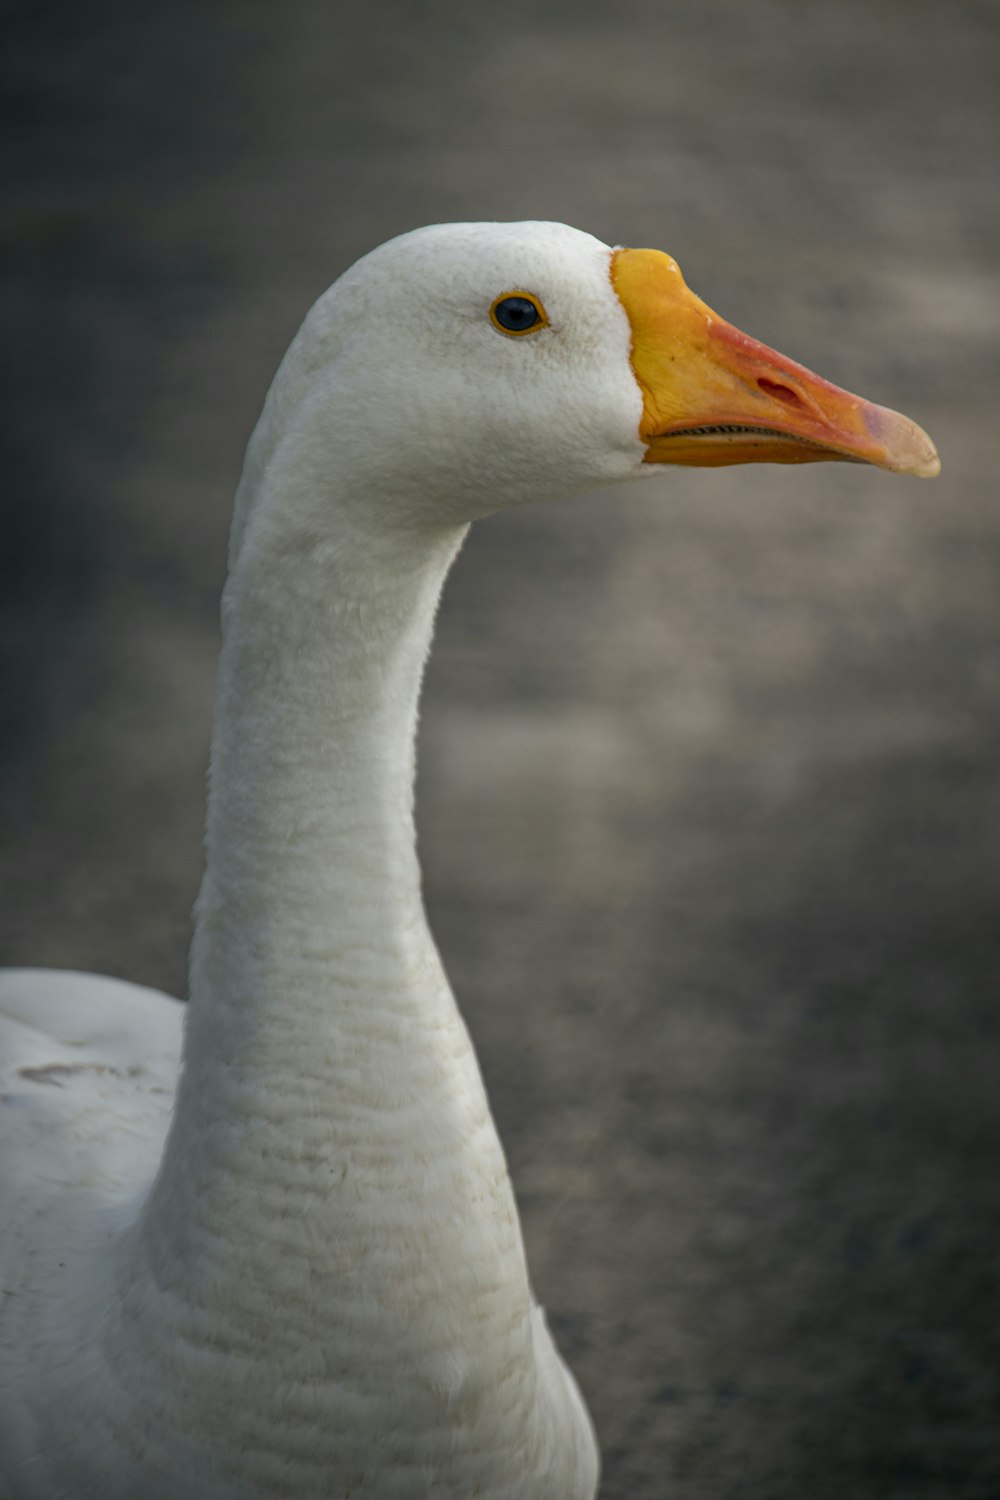 a close up of a white duck with a yellow beak